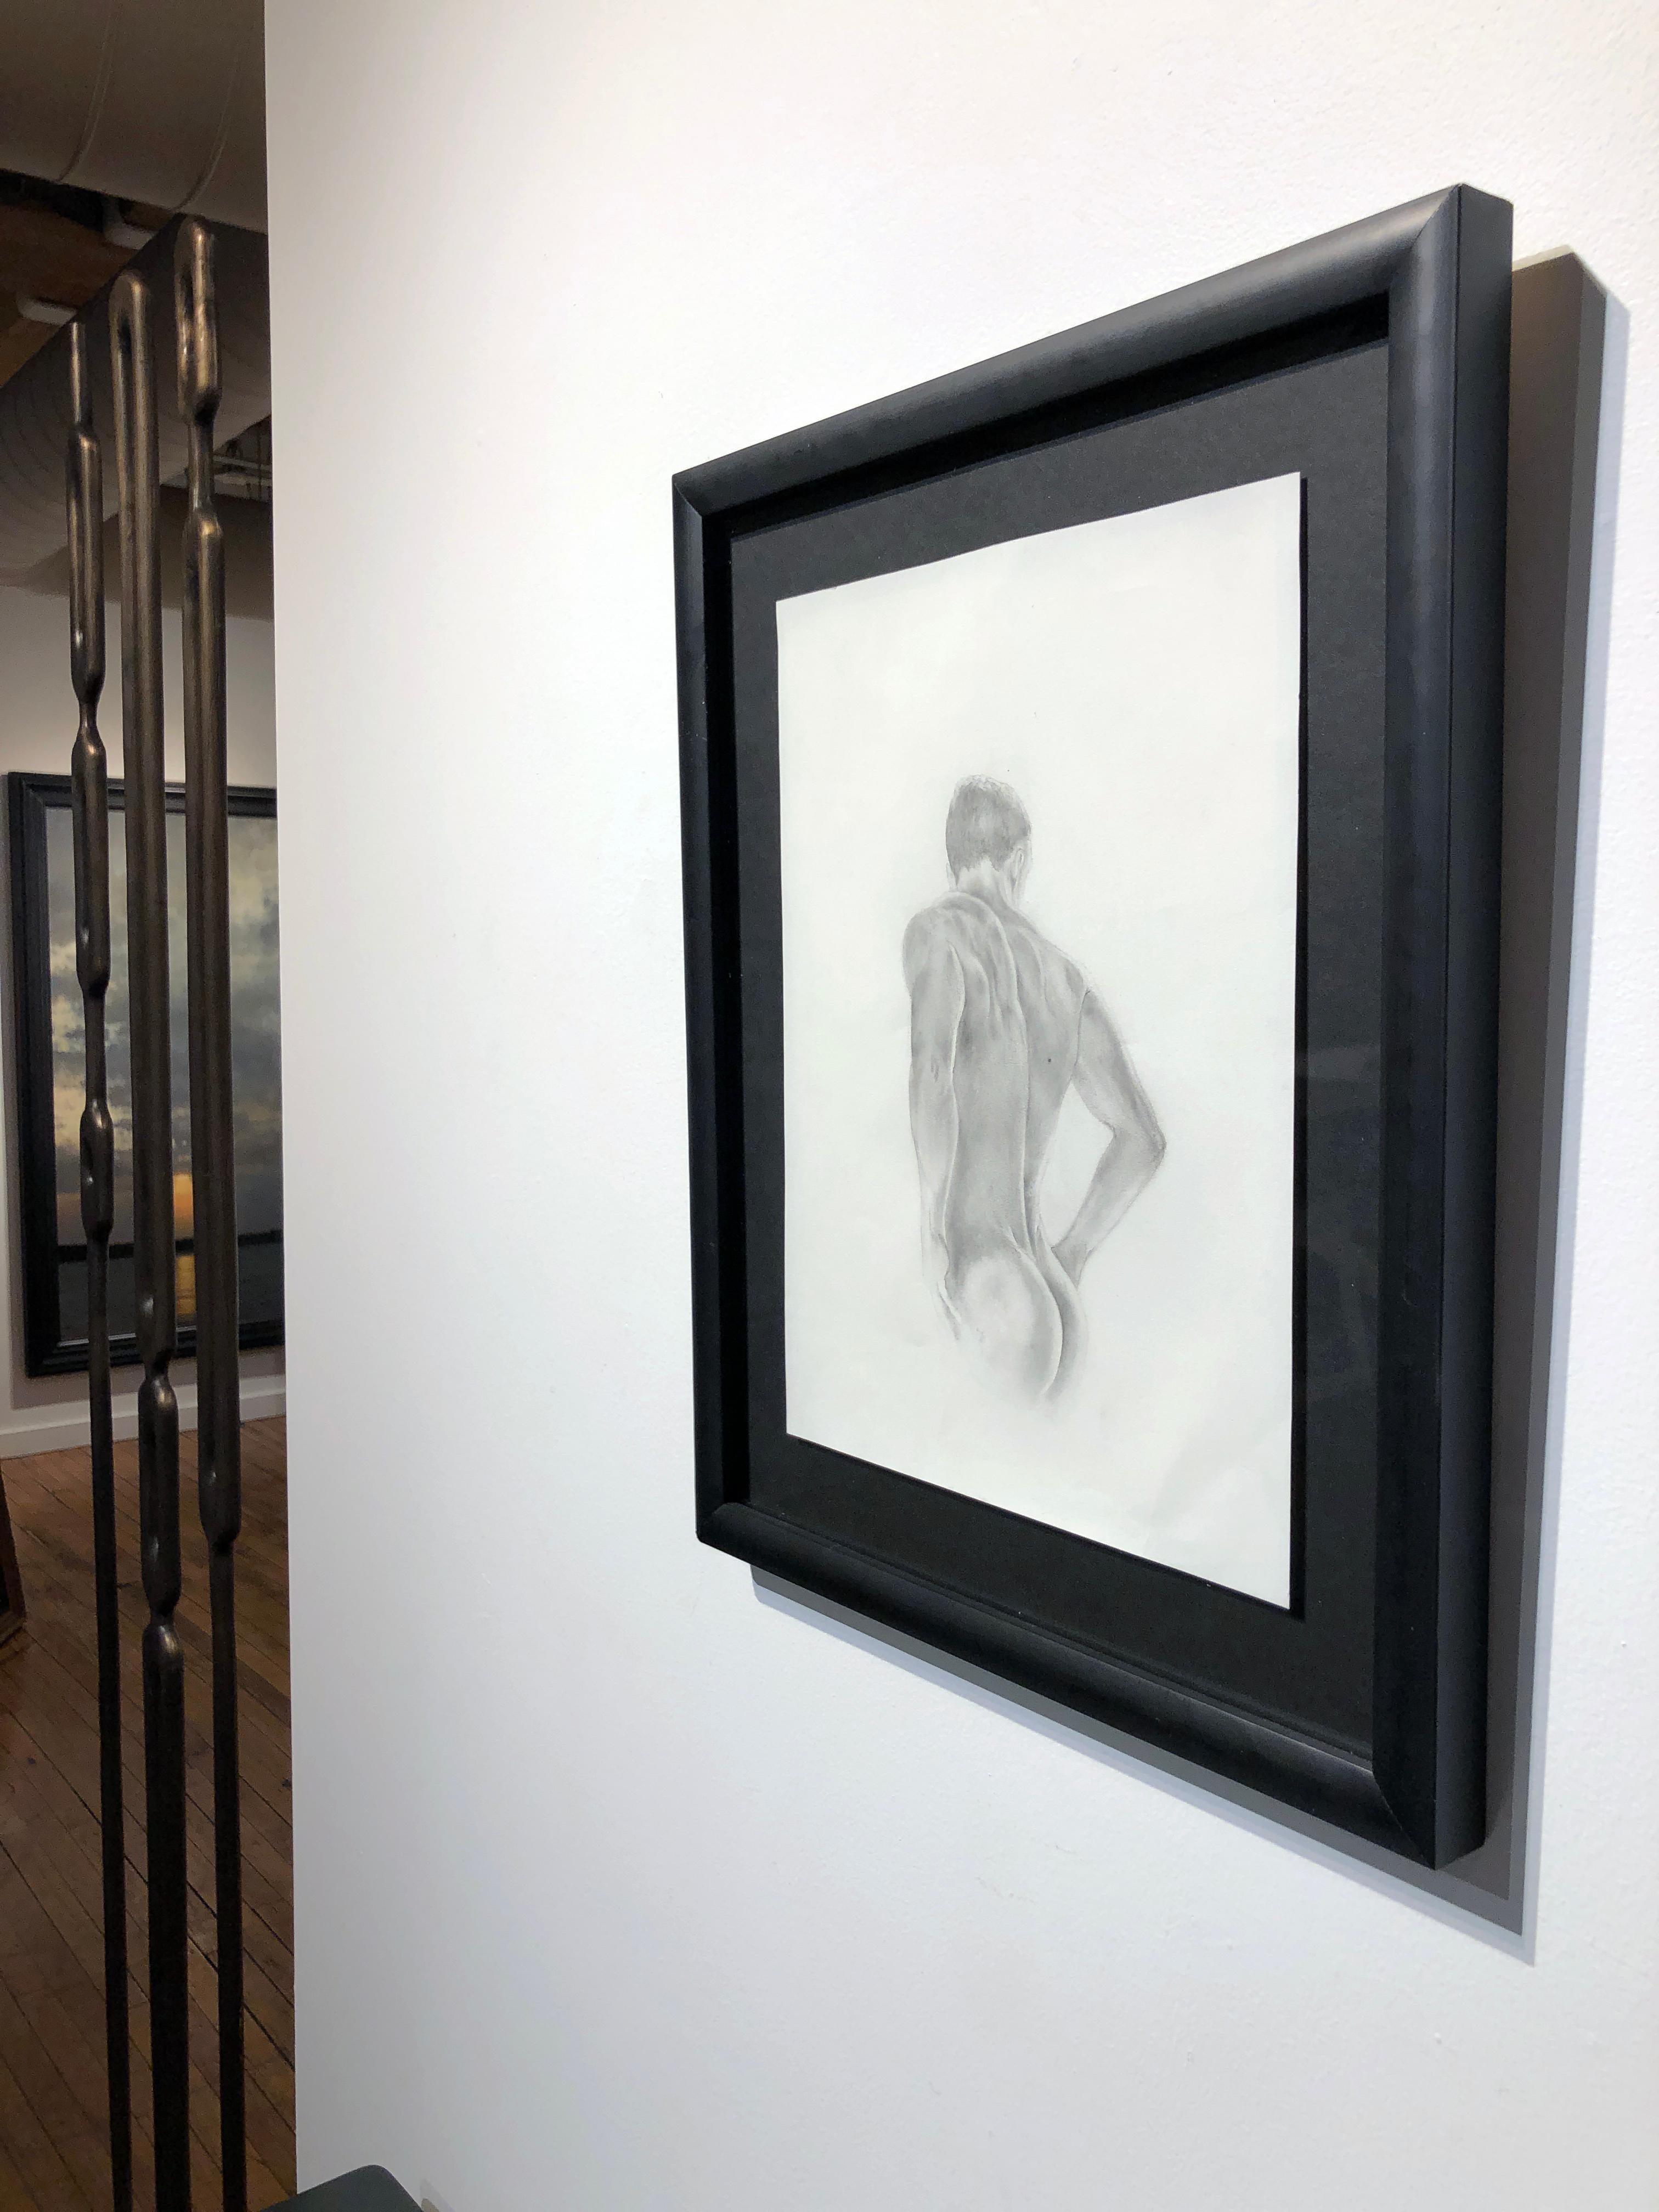 The Body is a Beacon - Muscular Male Nude, Graphite Drawing on Paper, Framed - Contemporary Art by Rick Sindt